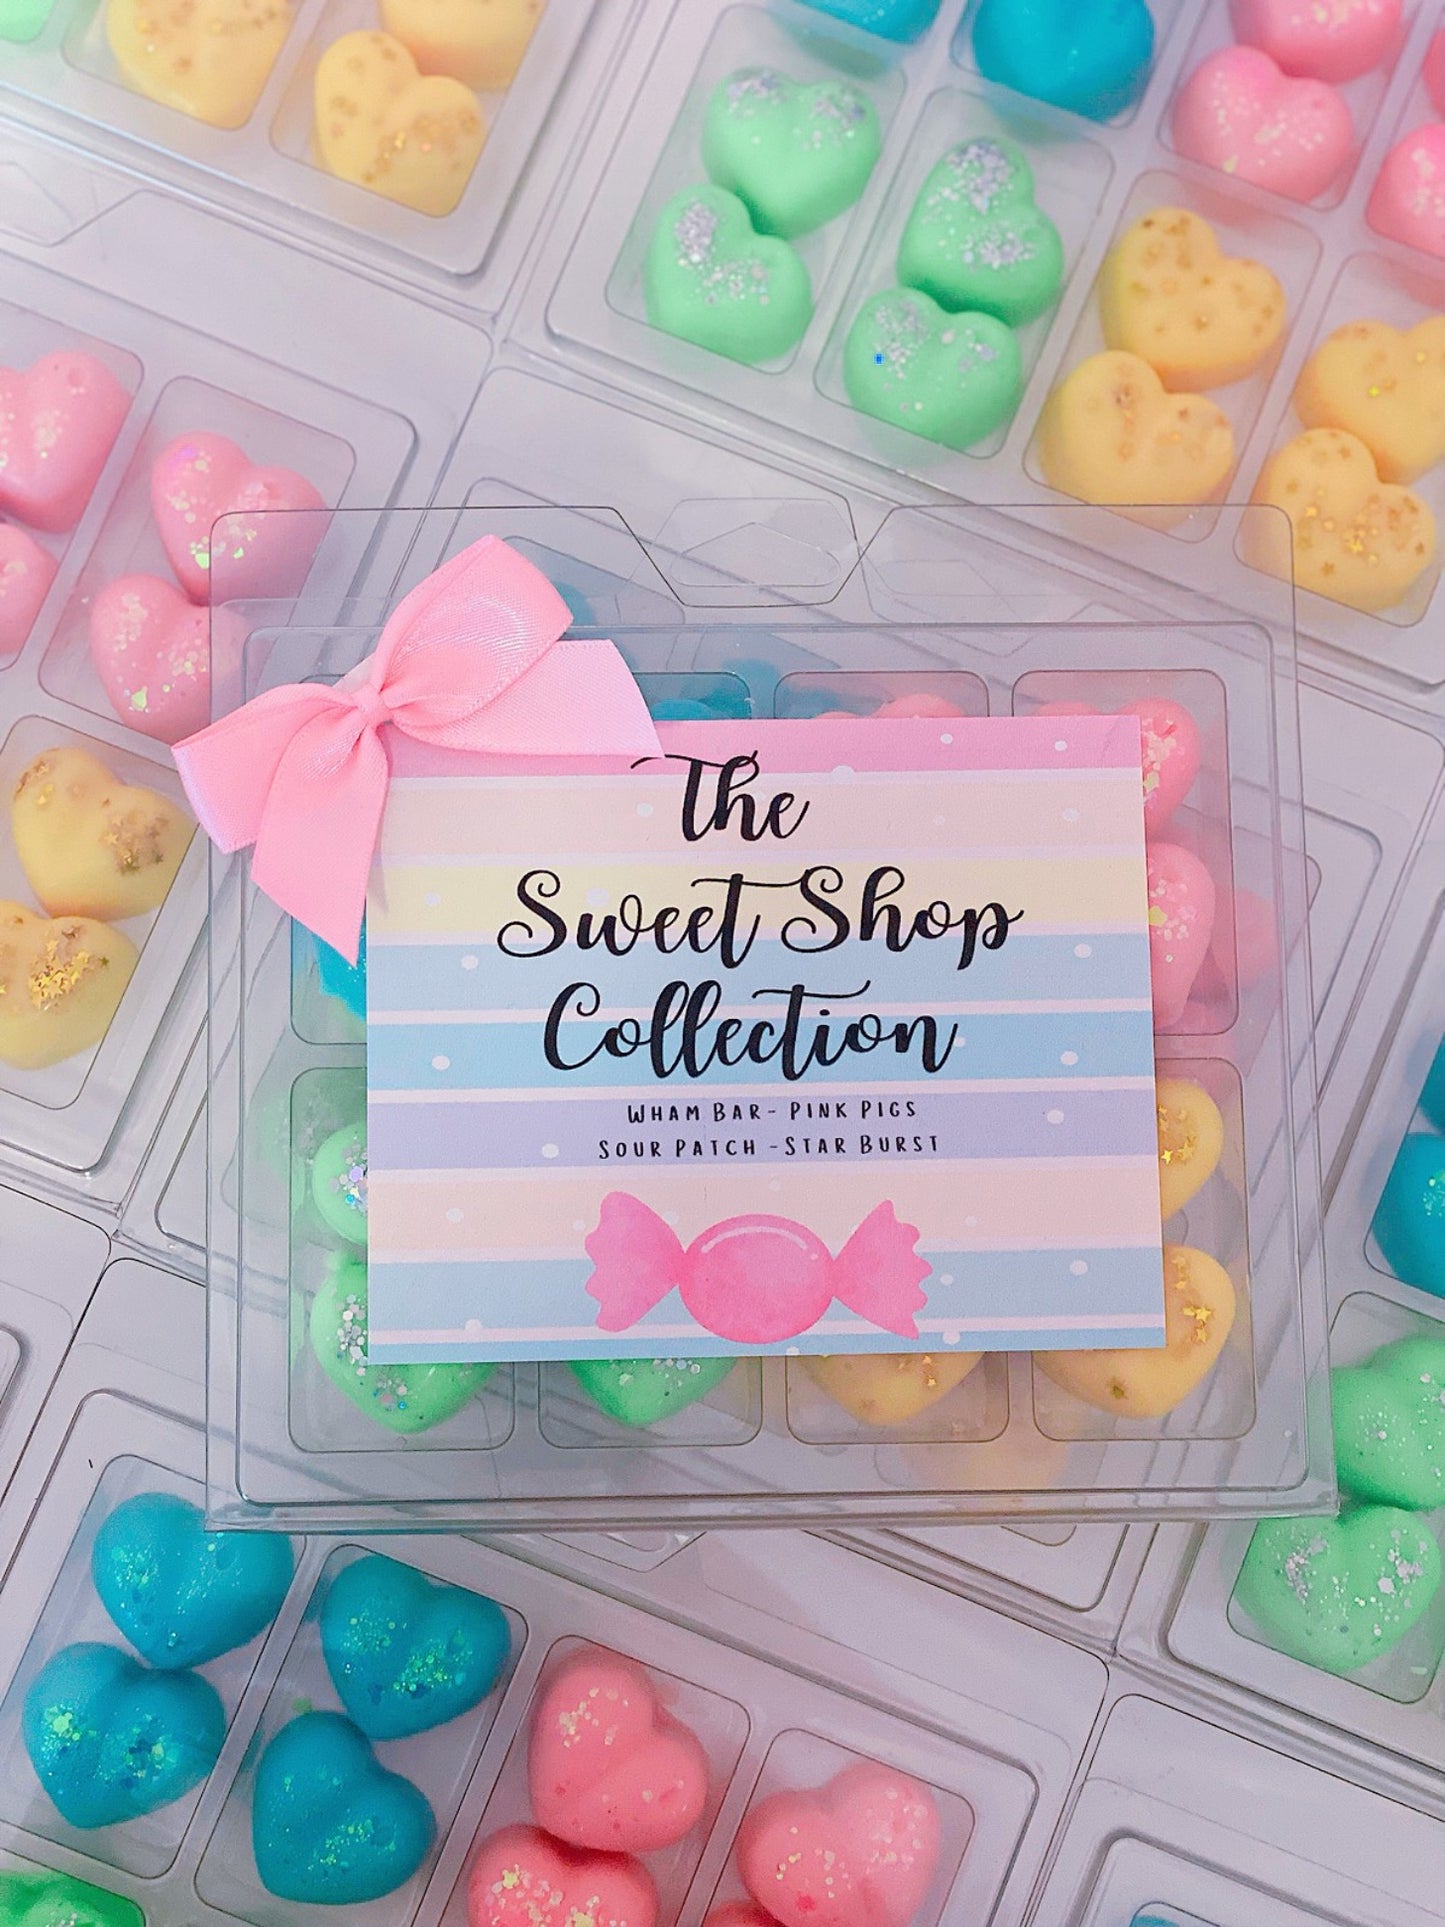 The Sweet Shop (Limited Edition Collection)